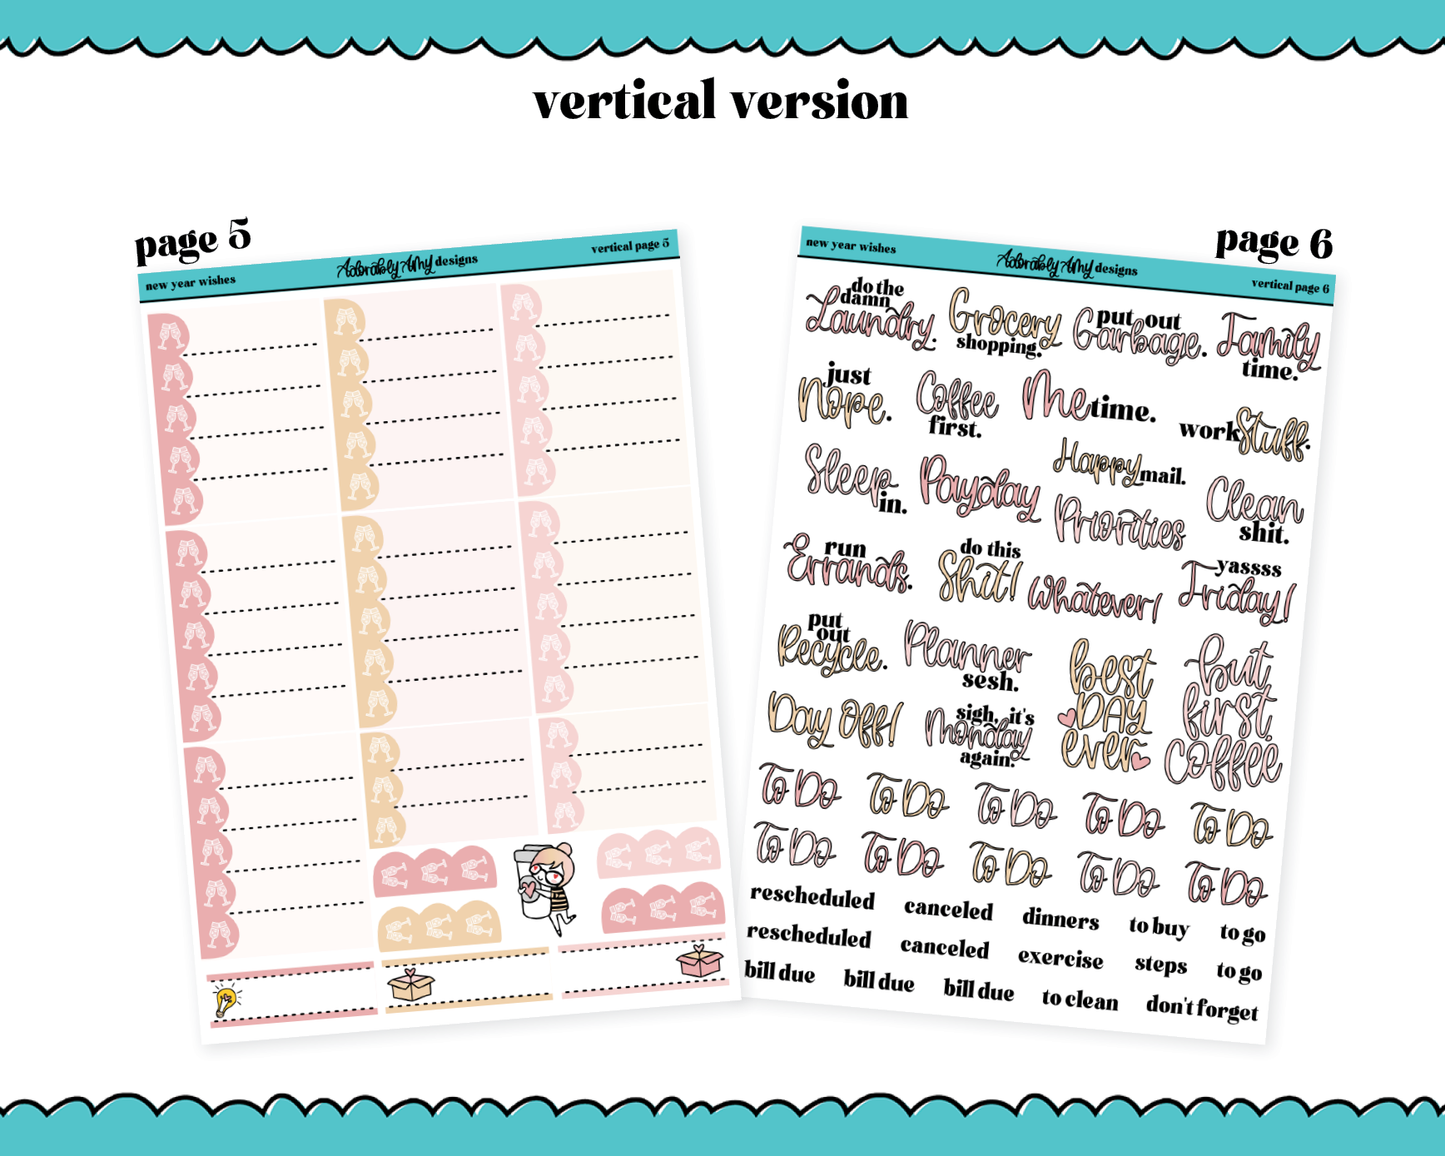 Vertical New Year Wishes Planner Sticker Kit for Vertical Standard Size Planners or Inserts